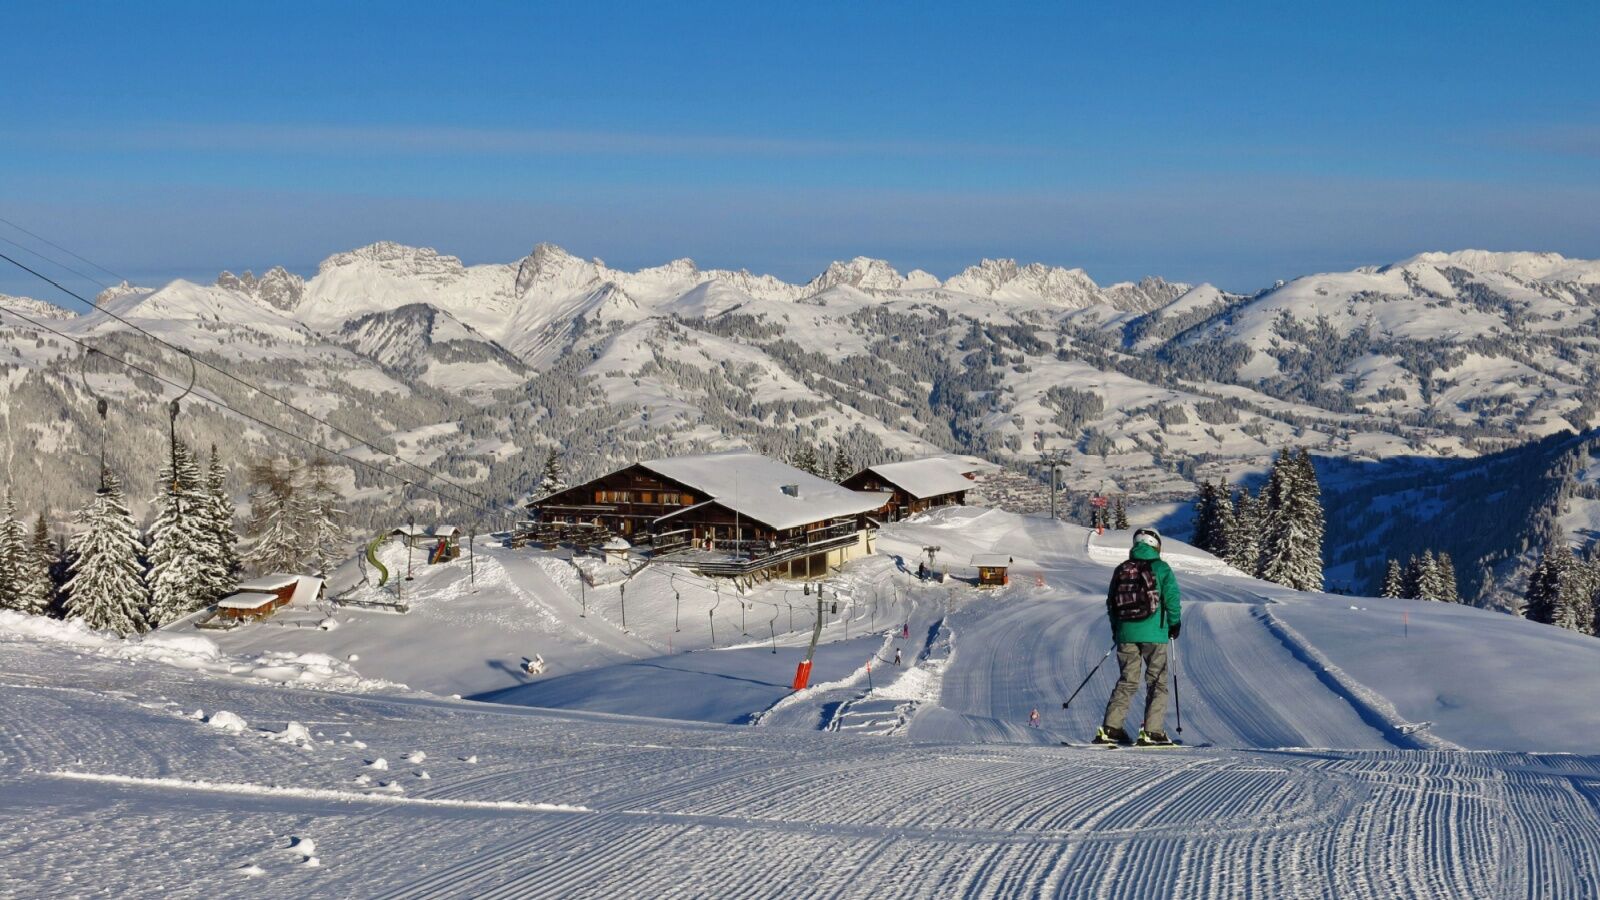 Gstaad is one of the best ski resorts in the alps for beginners. skier going down an easy groomed slope